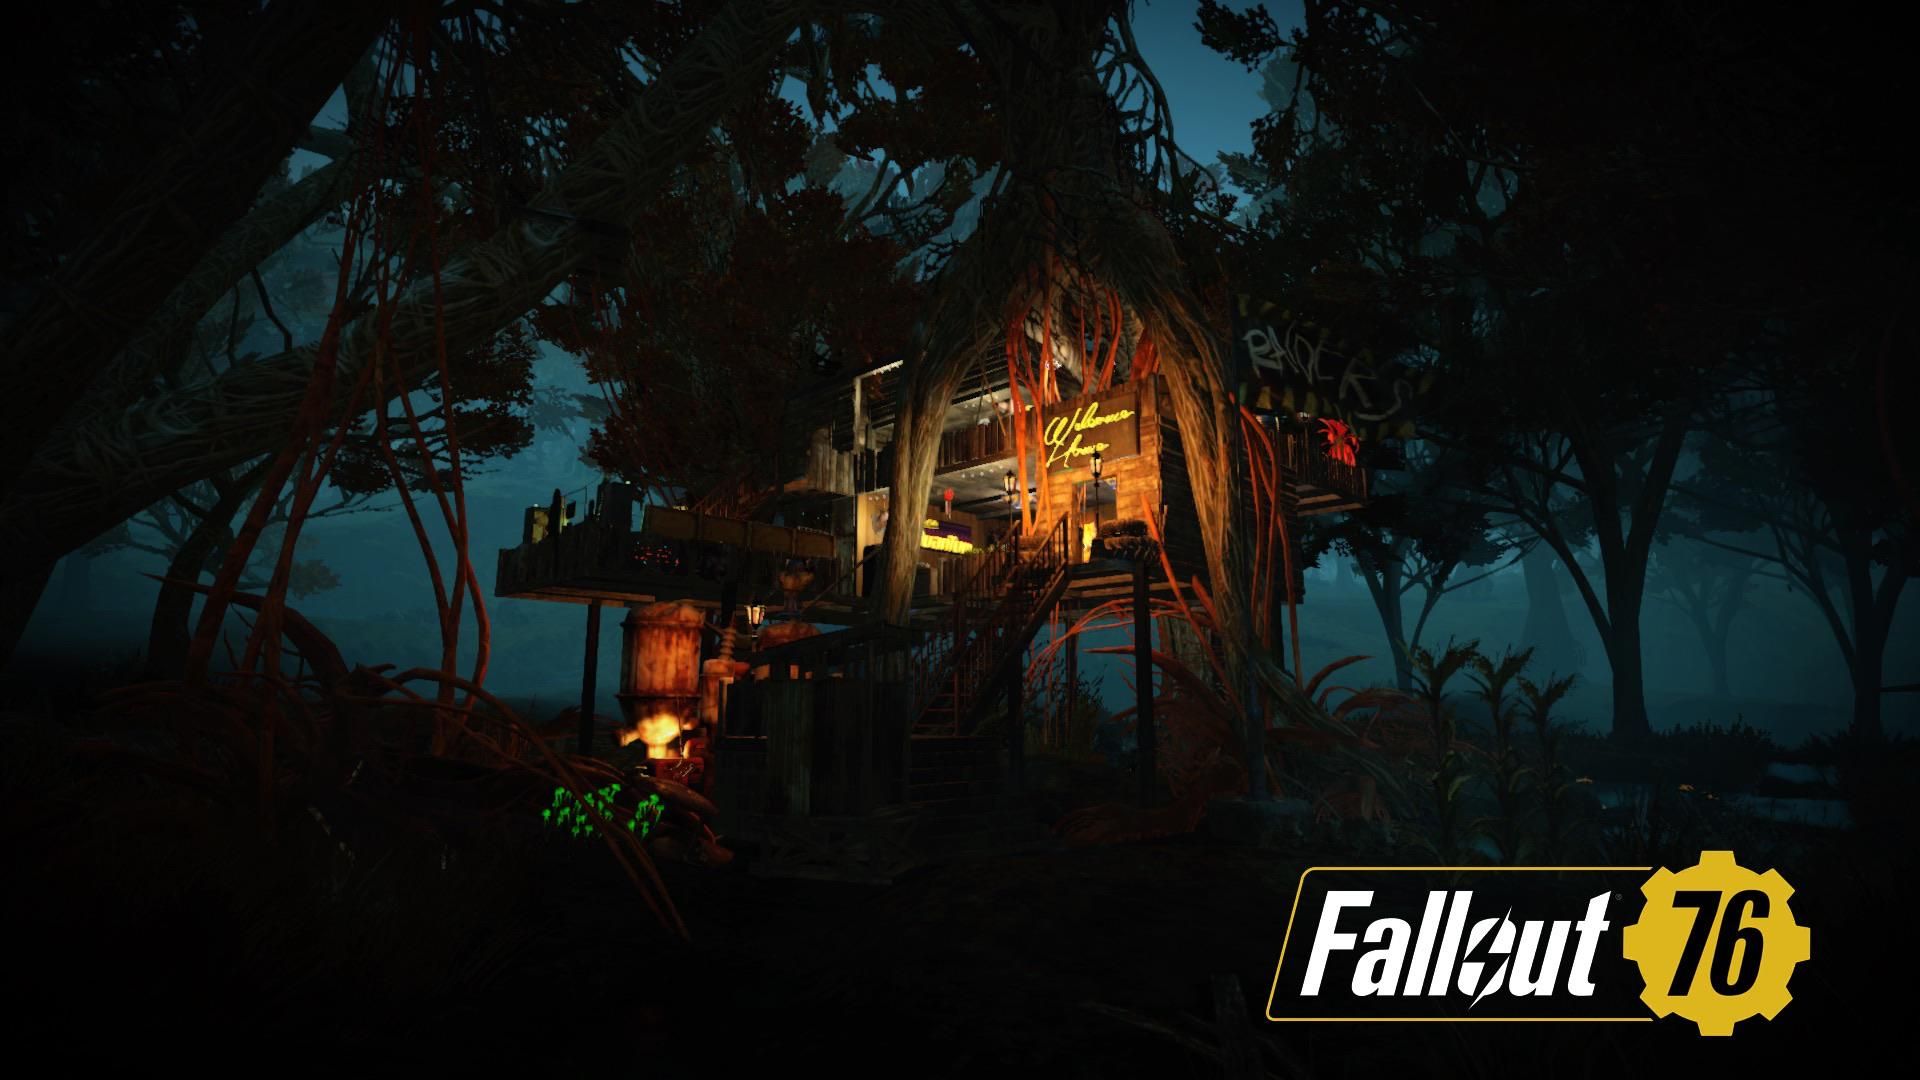 The Mire Treetops treehouse Fallout 76